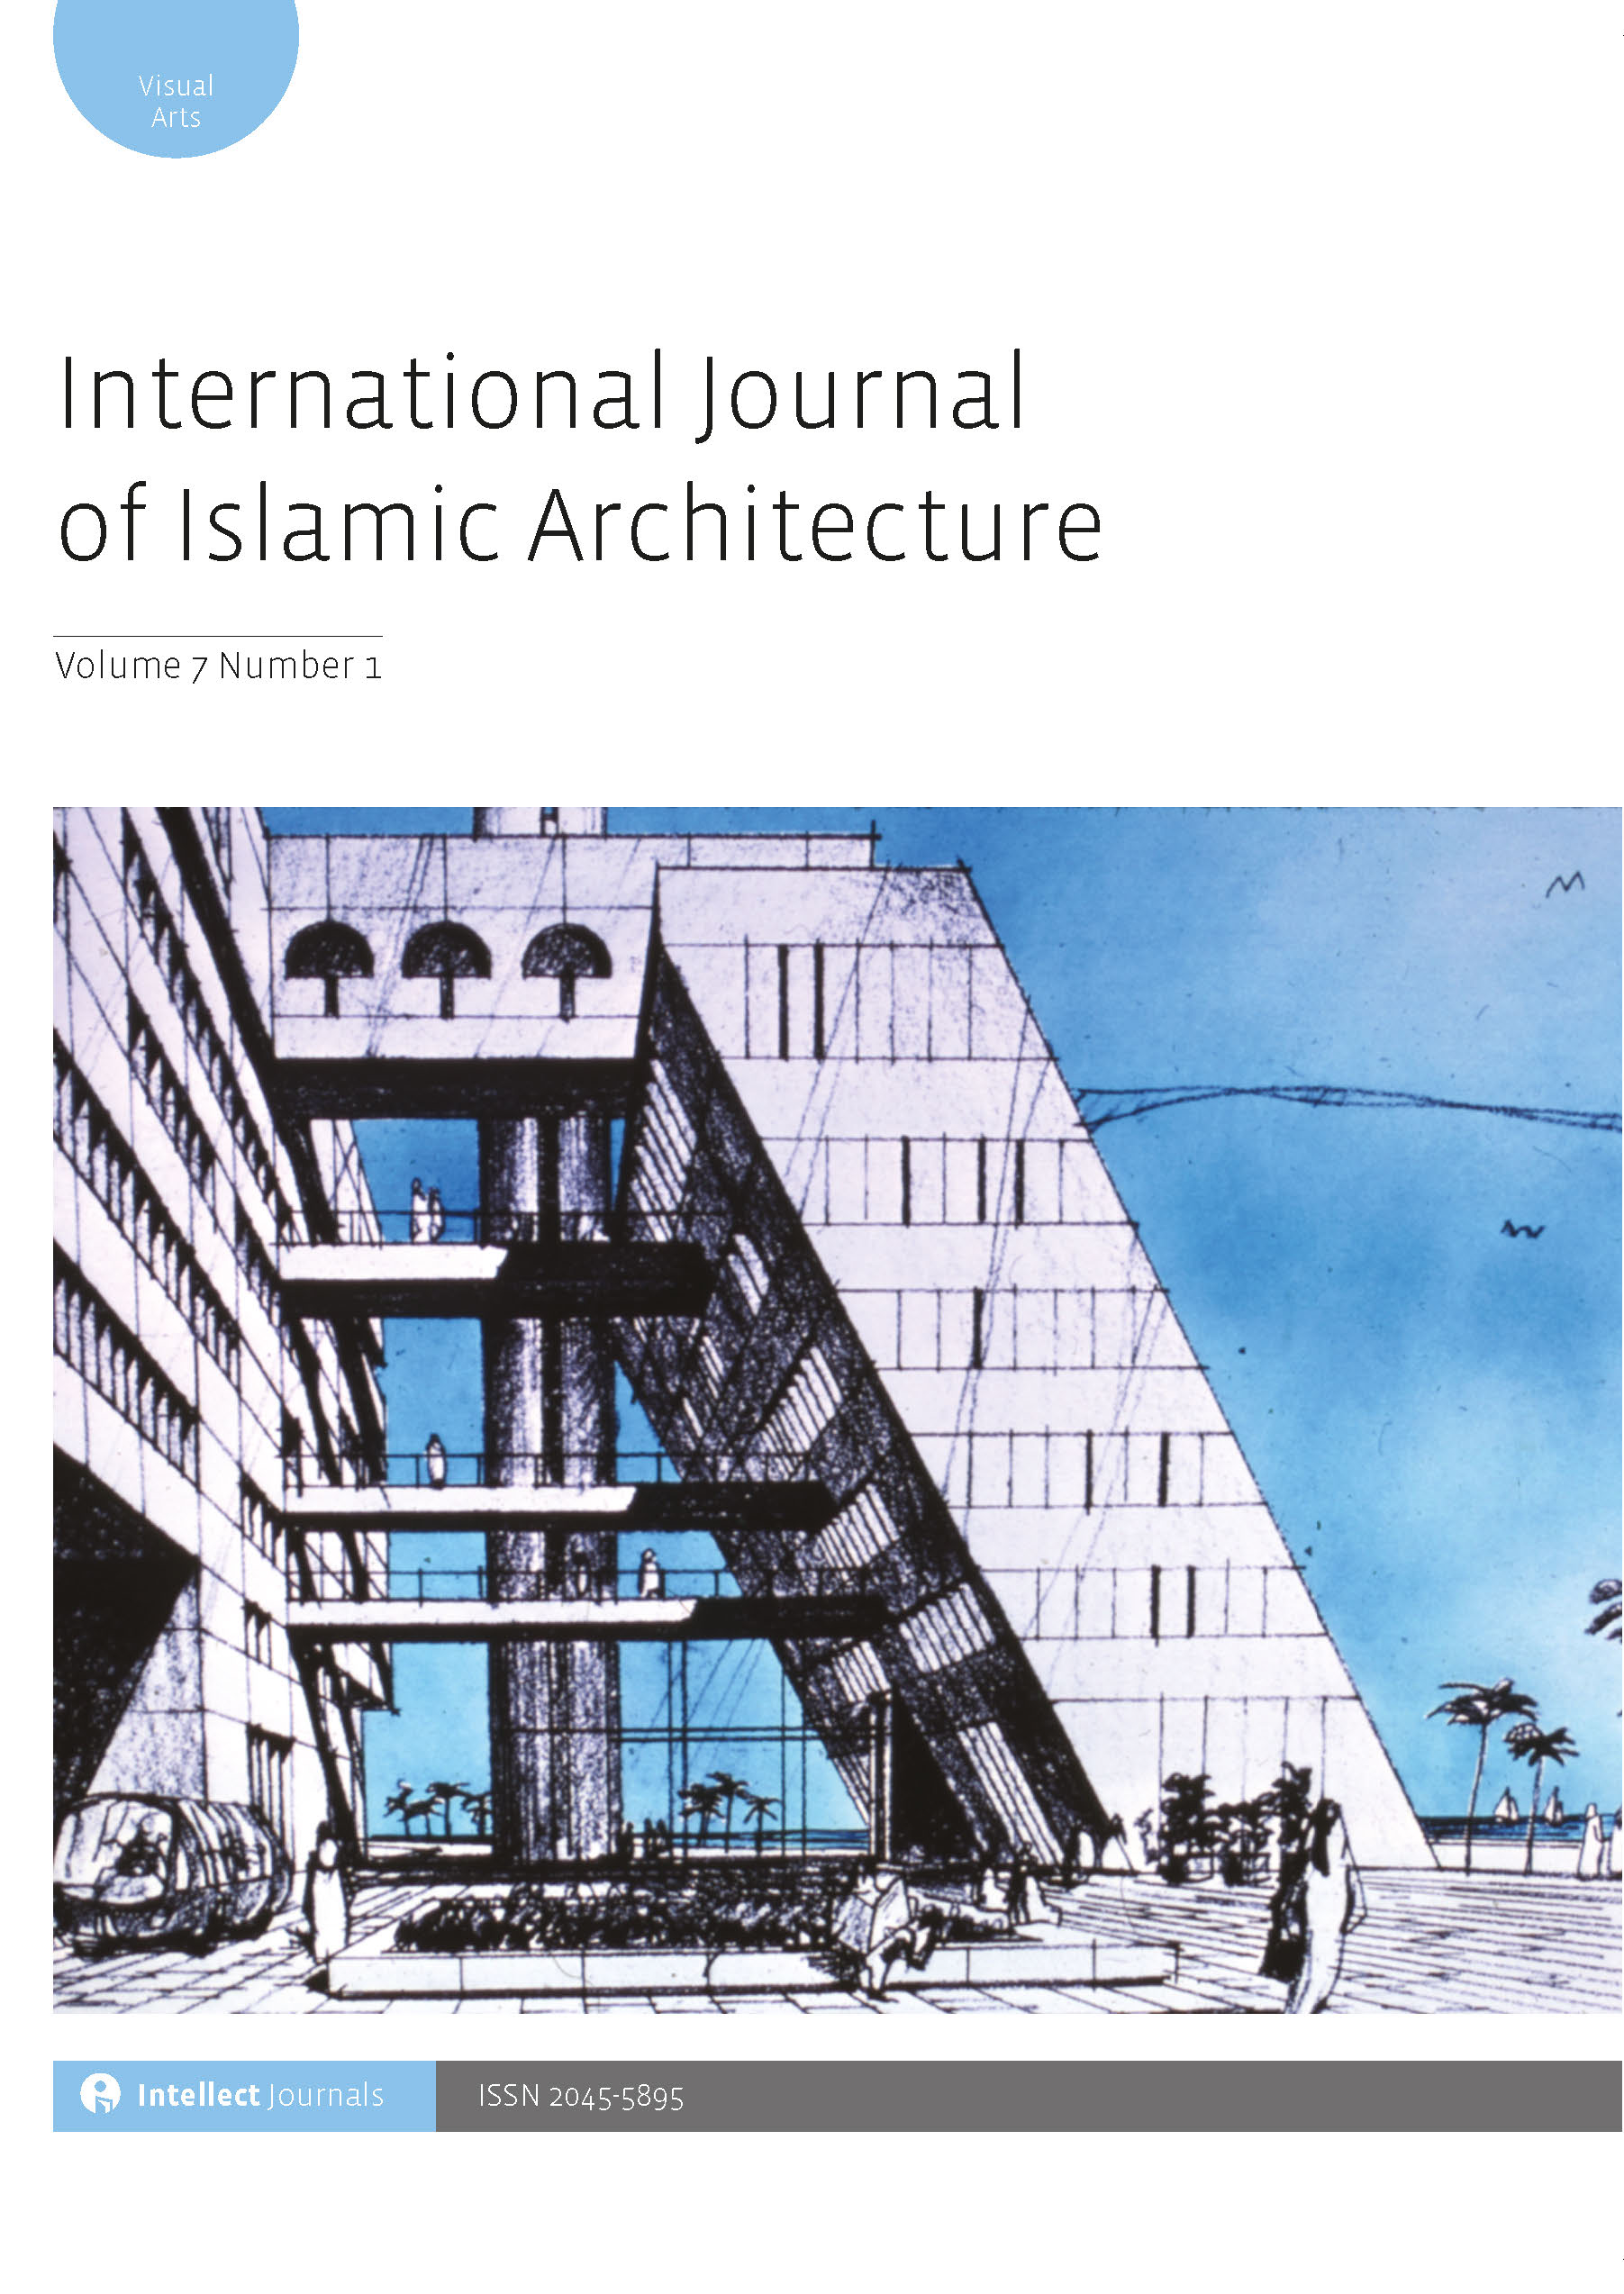 Because We Can: Globalization and Technology Enabling Iconic Architectural Excesses